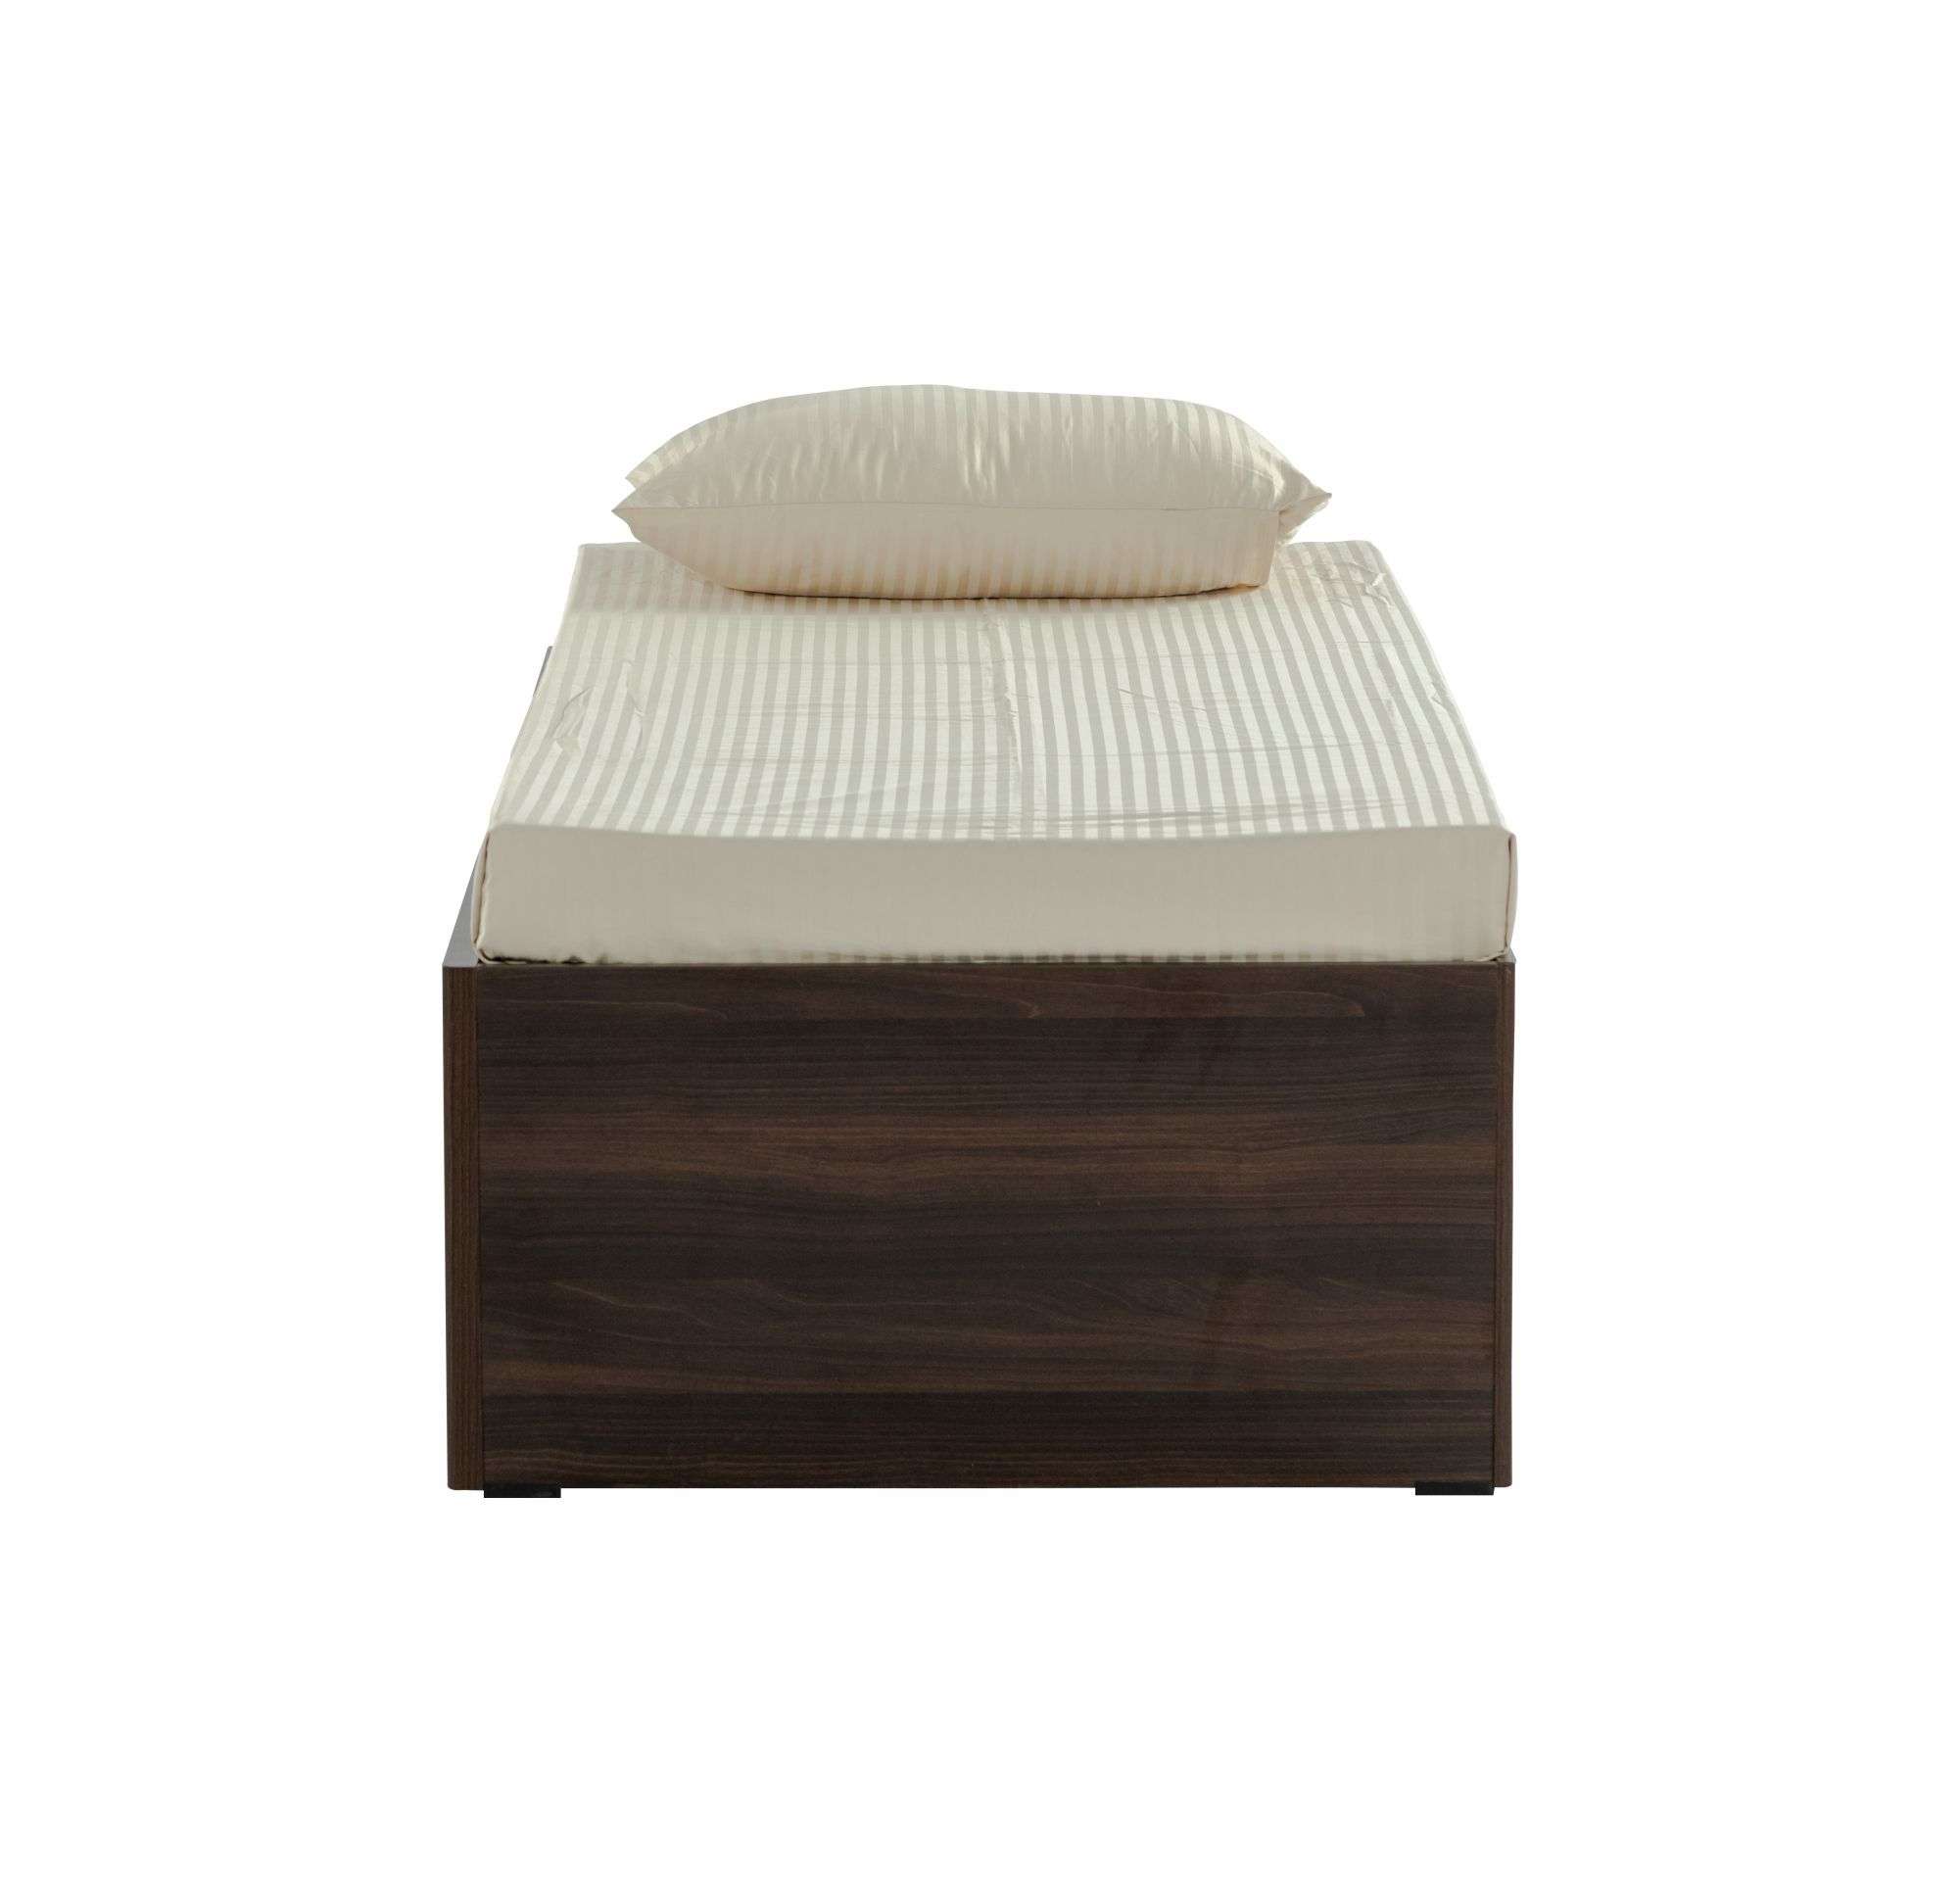 KDB001-KD Day Bed With Storage-M42/M41